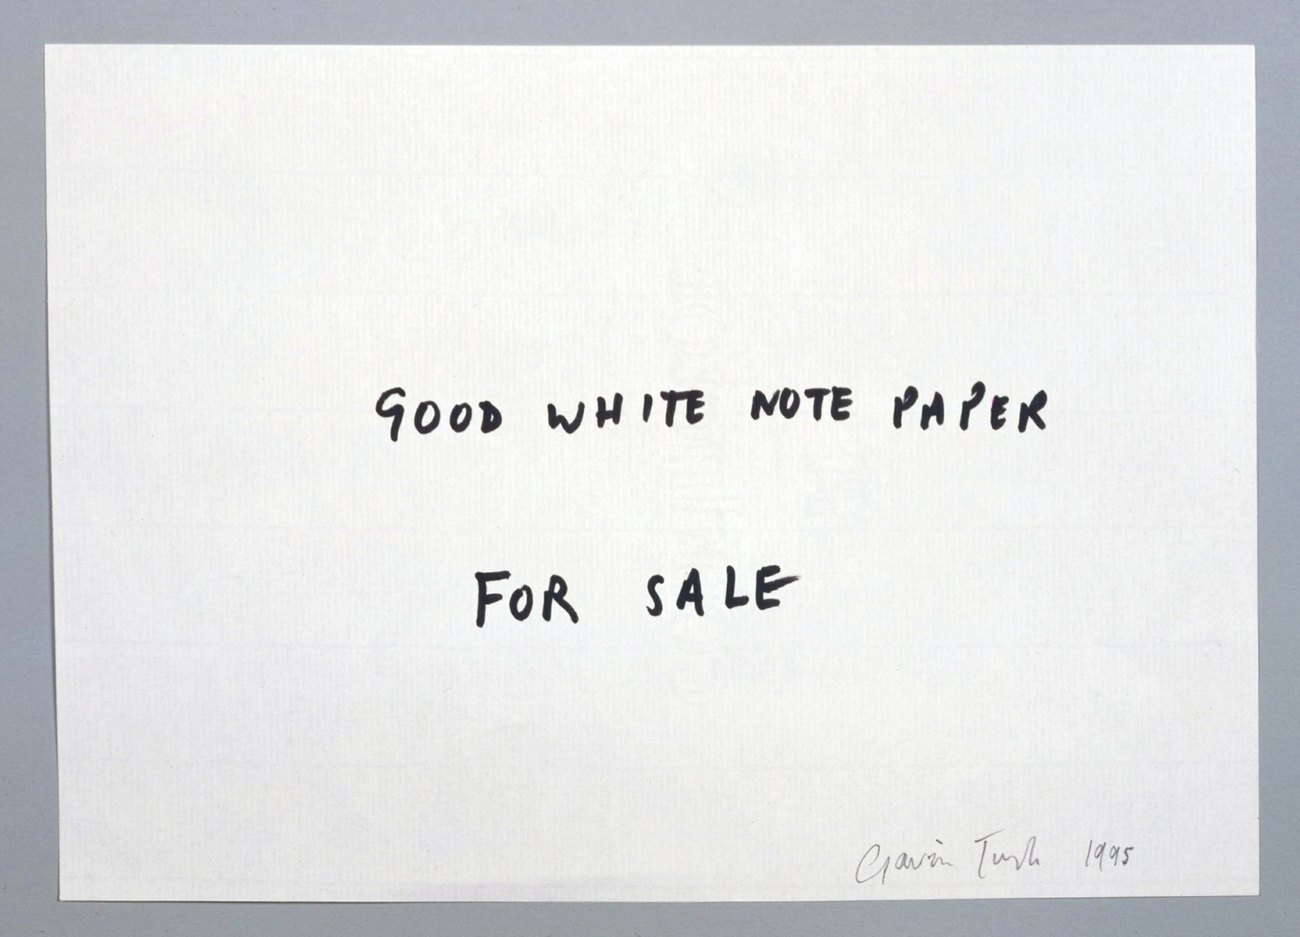 Good White Note Paper for Sale